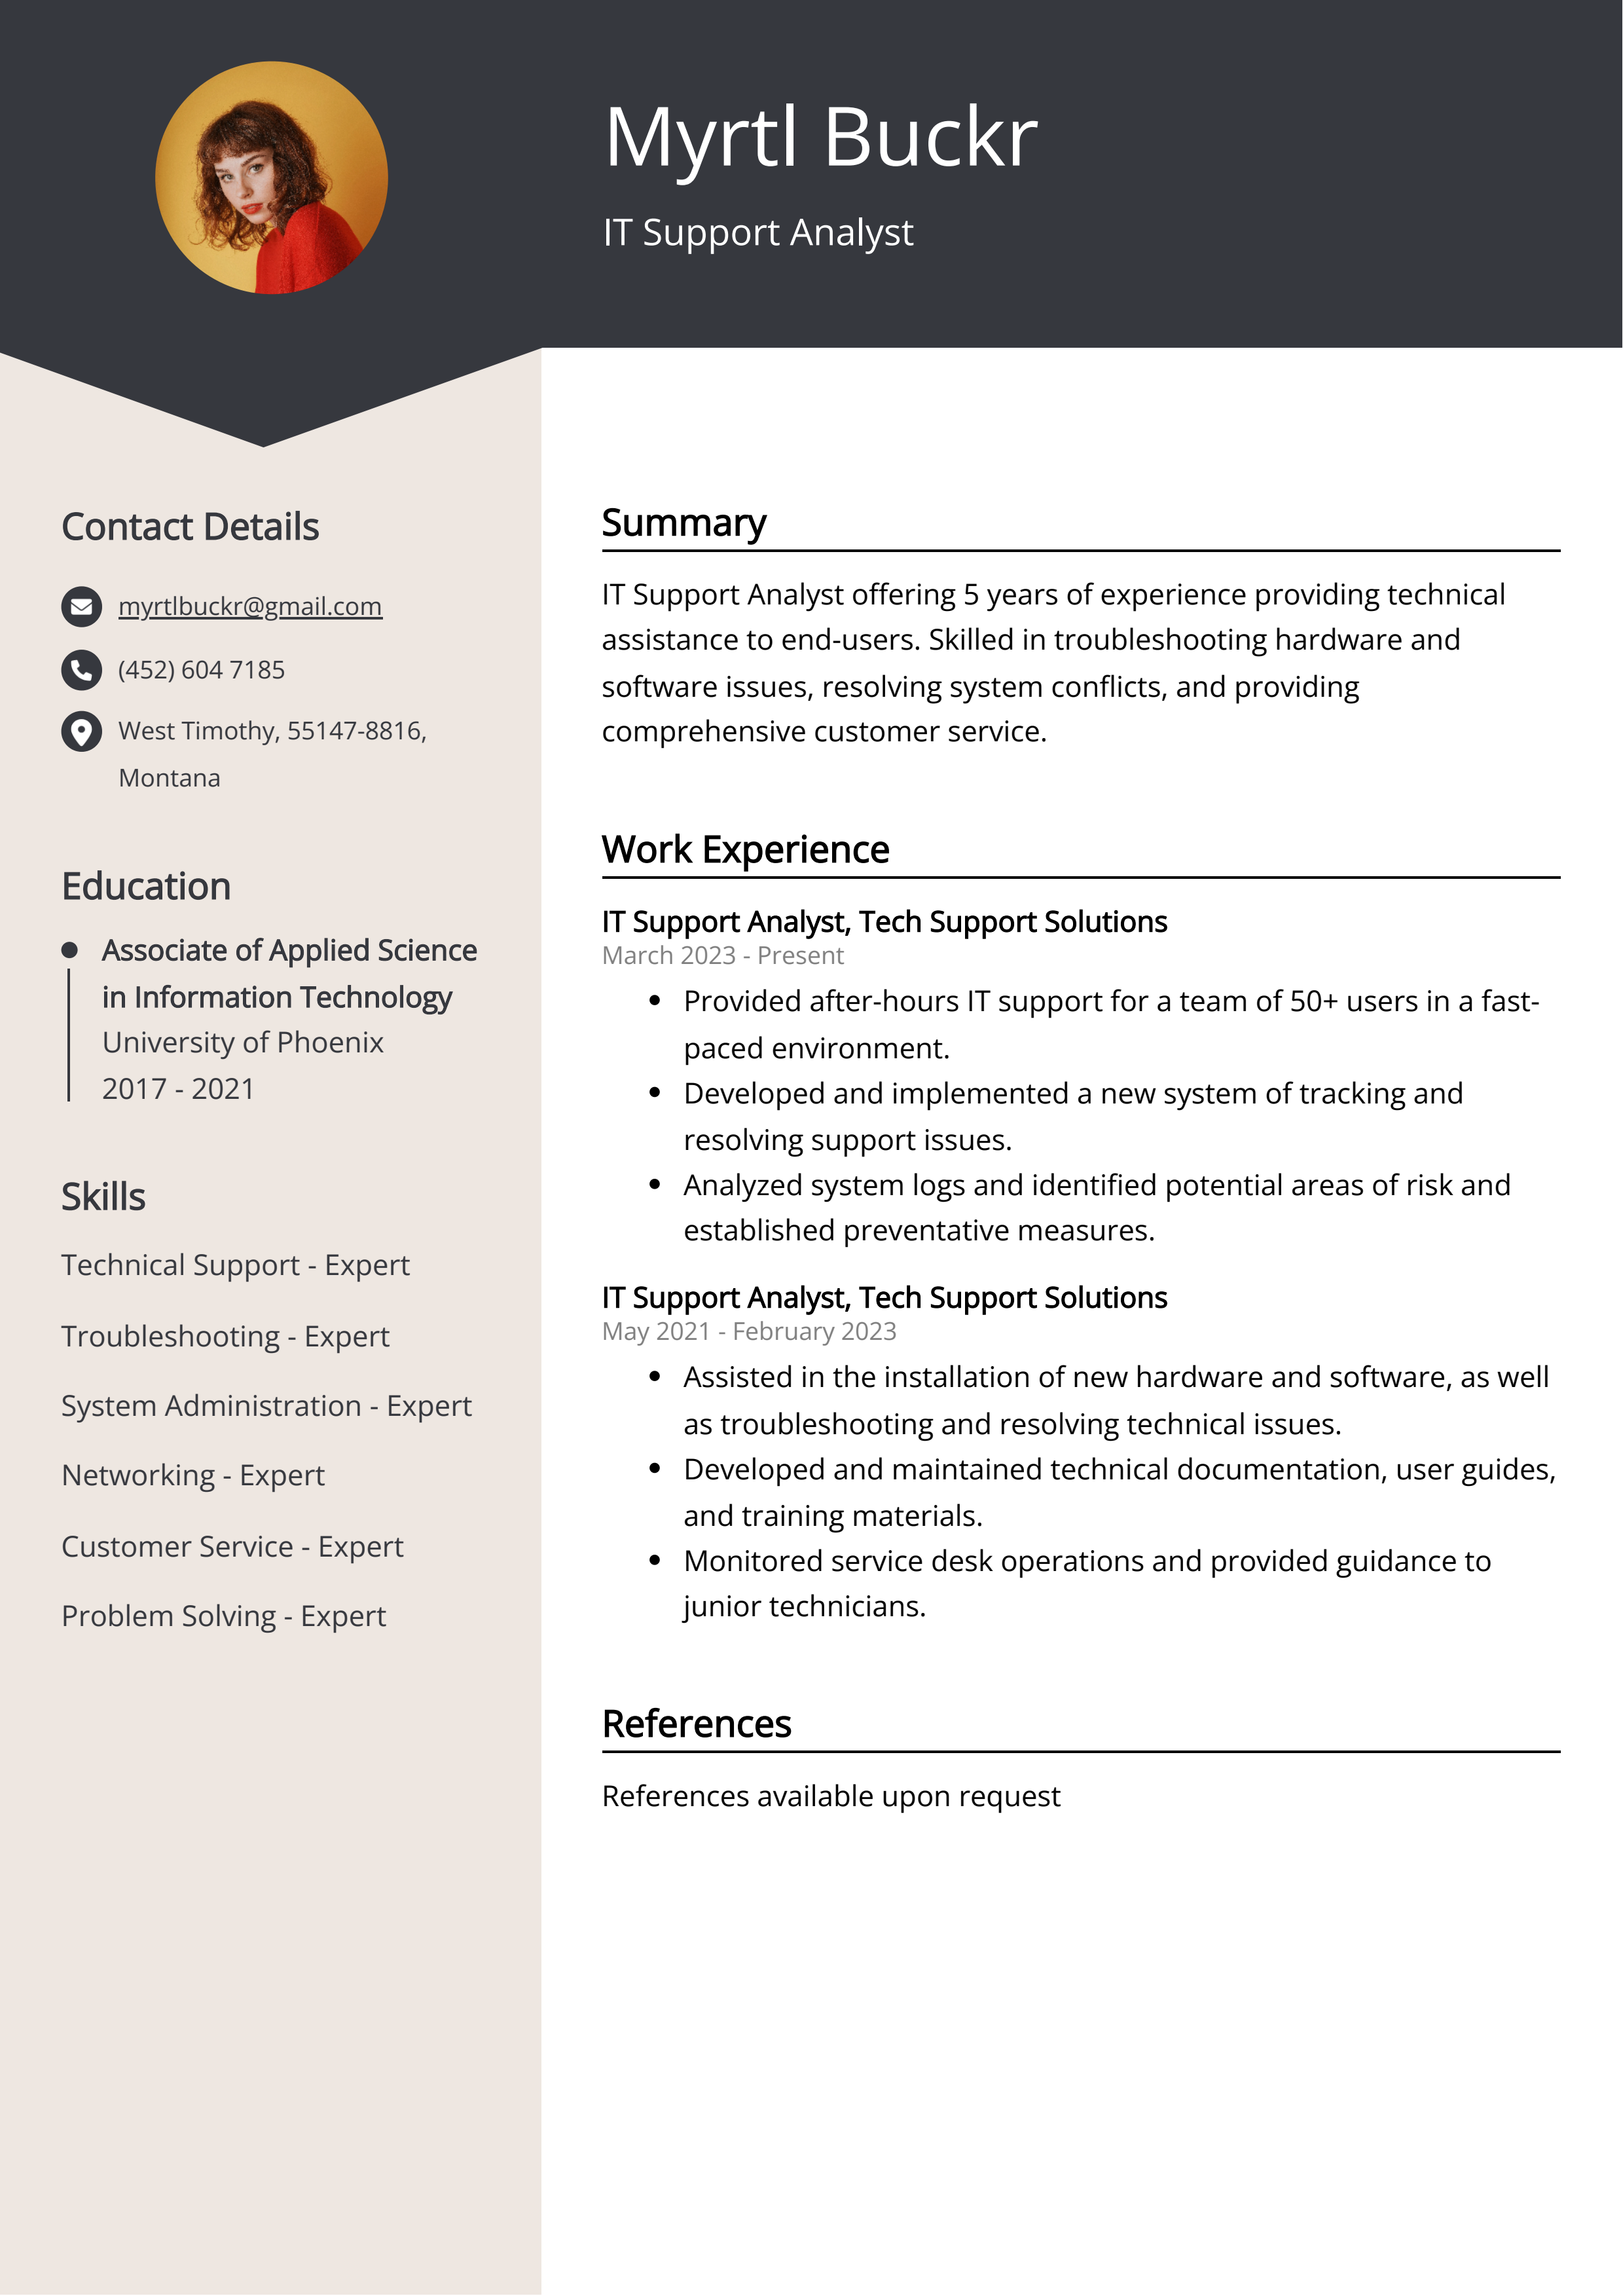 IT Support Analyst CV Example